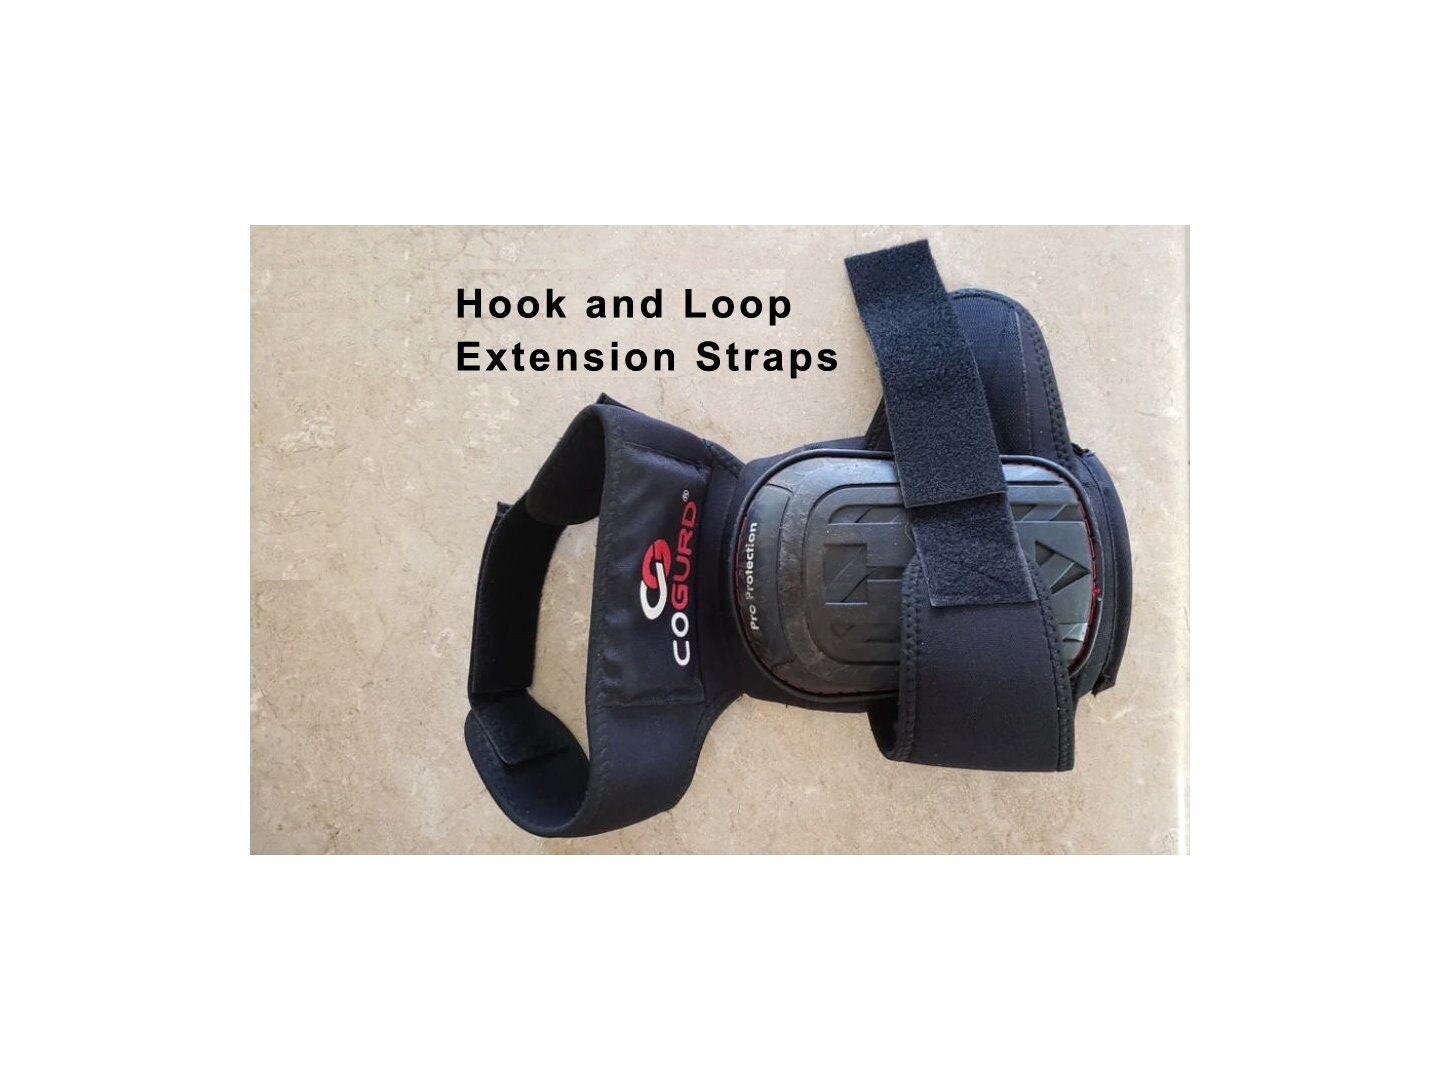 Shoe Straps Extenders Easily Add Length and Width for High Insteps & Wide Shoes! Add Yourself! Made Using Velcro Brand Fastener Material!